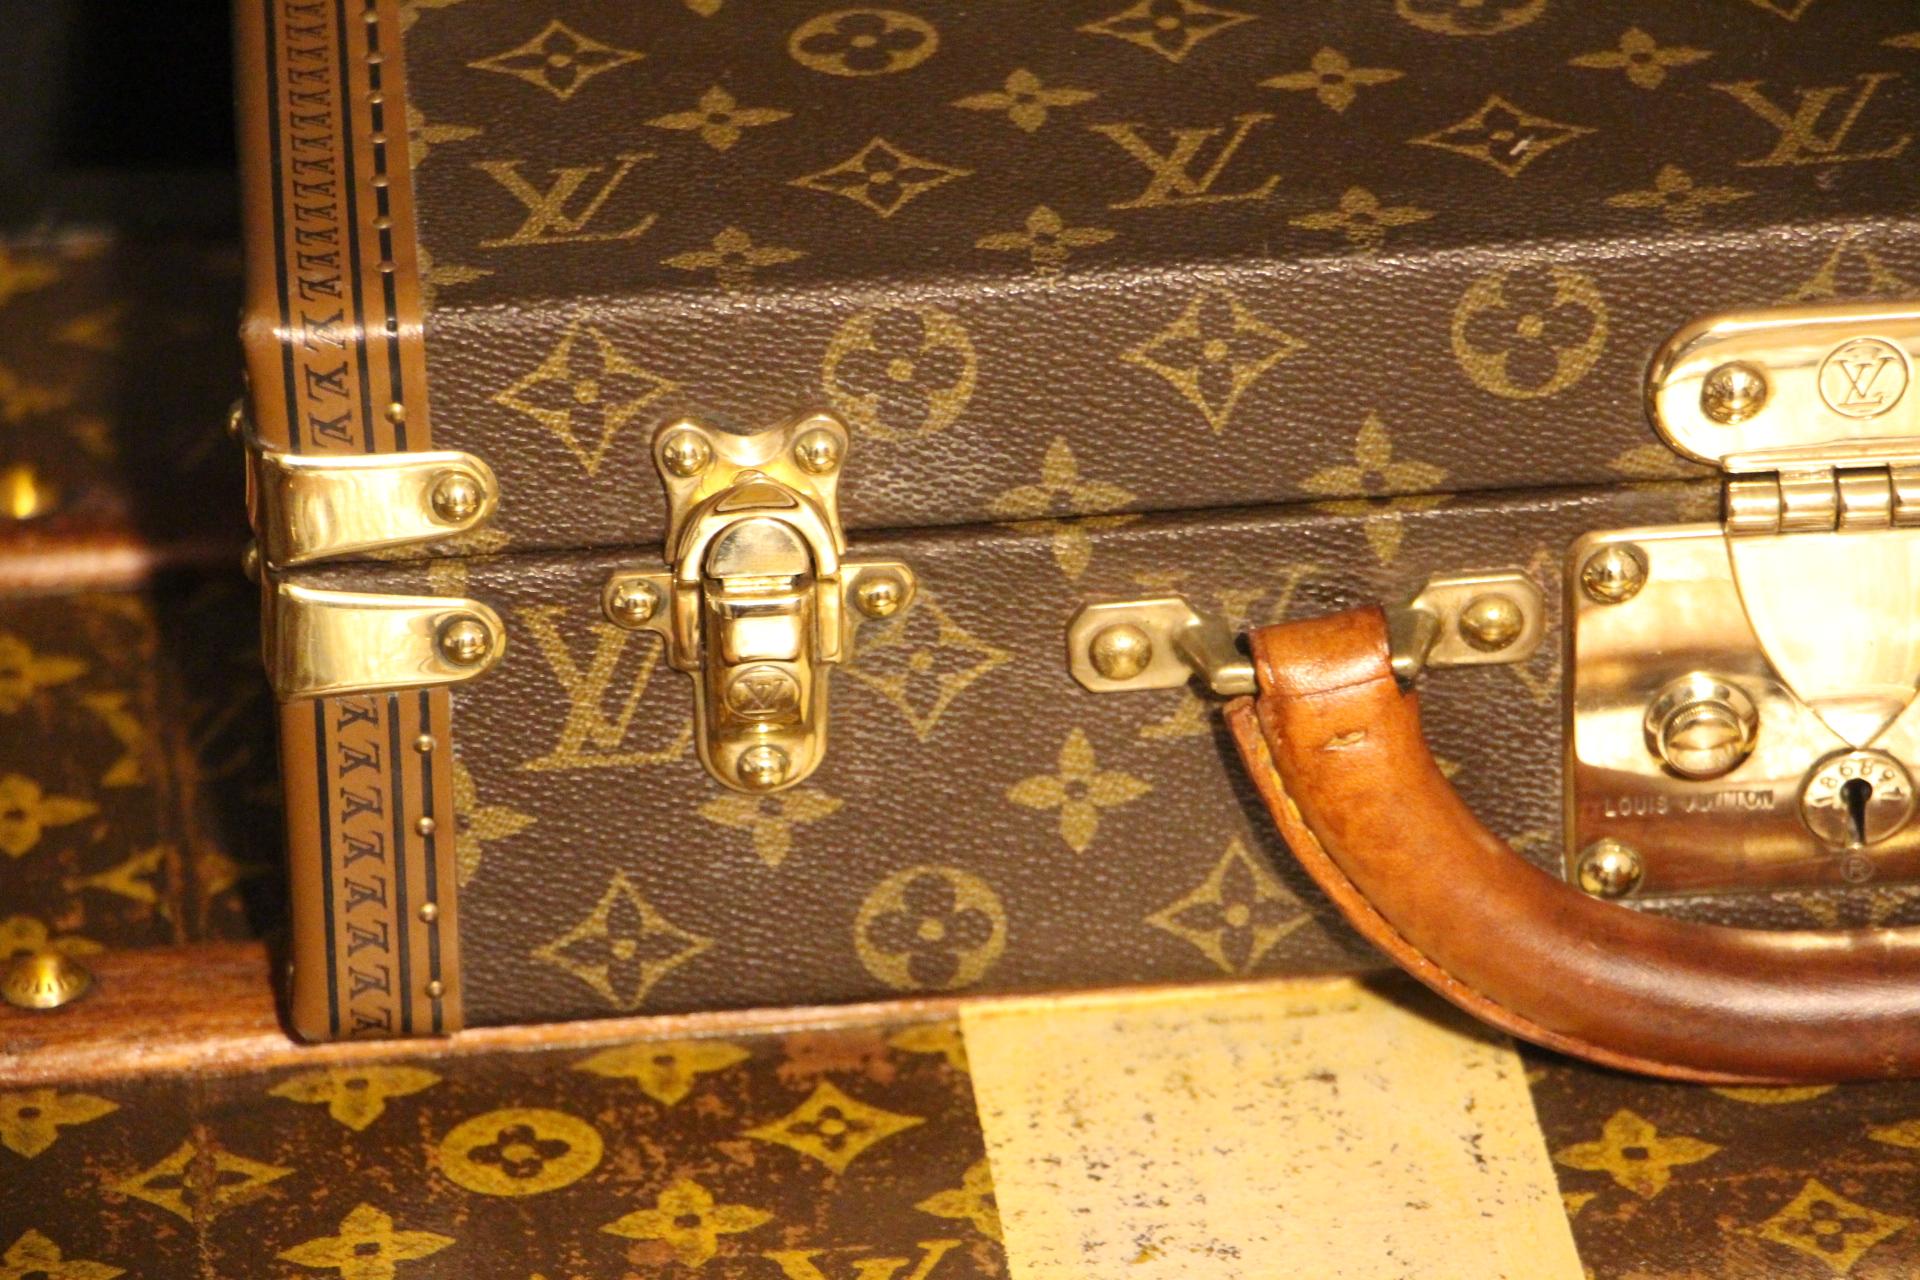 This elegant Louis Vuitton briefcase features monogram canvas and a comfortable leather handle. Closed by a solid brass lock, it is accompanied by two crafted brass trunk latches. Its trims are printed with the LV logo all around.
Its interior is